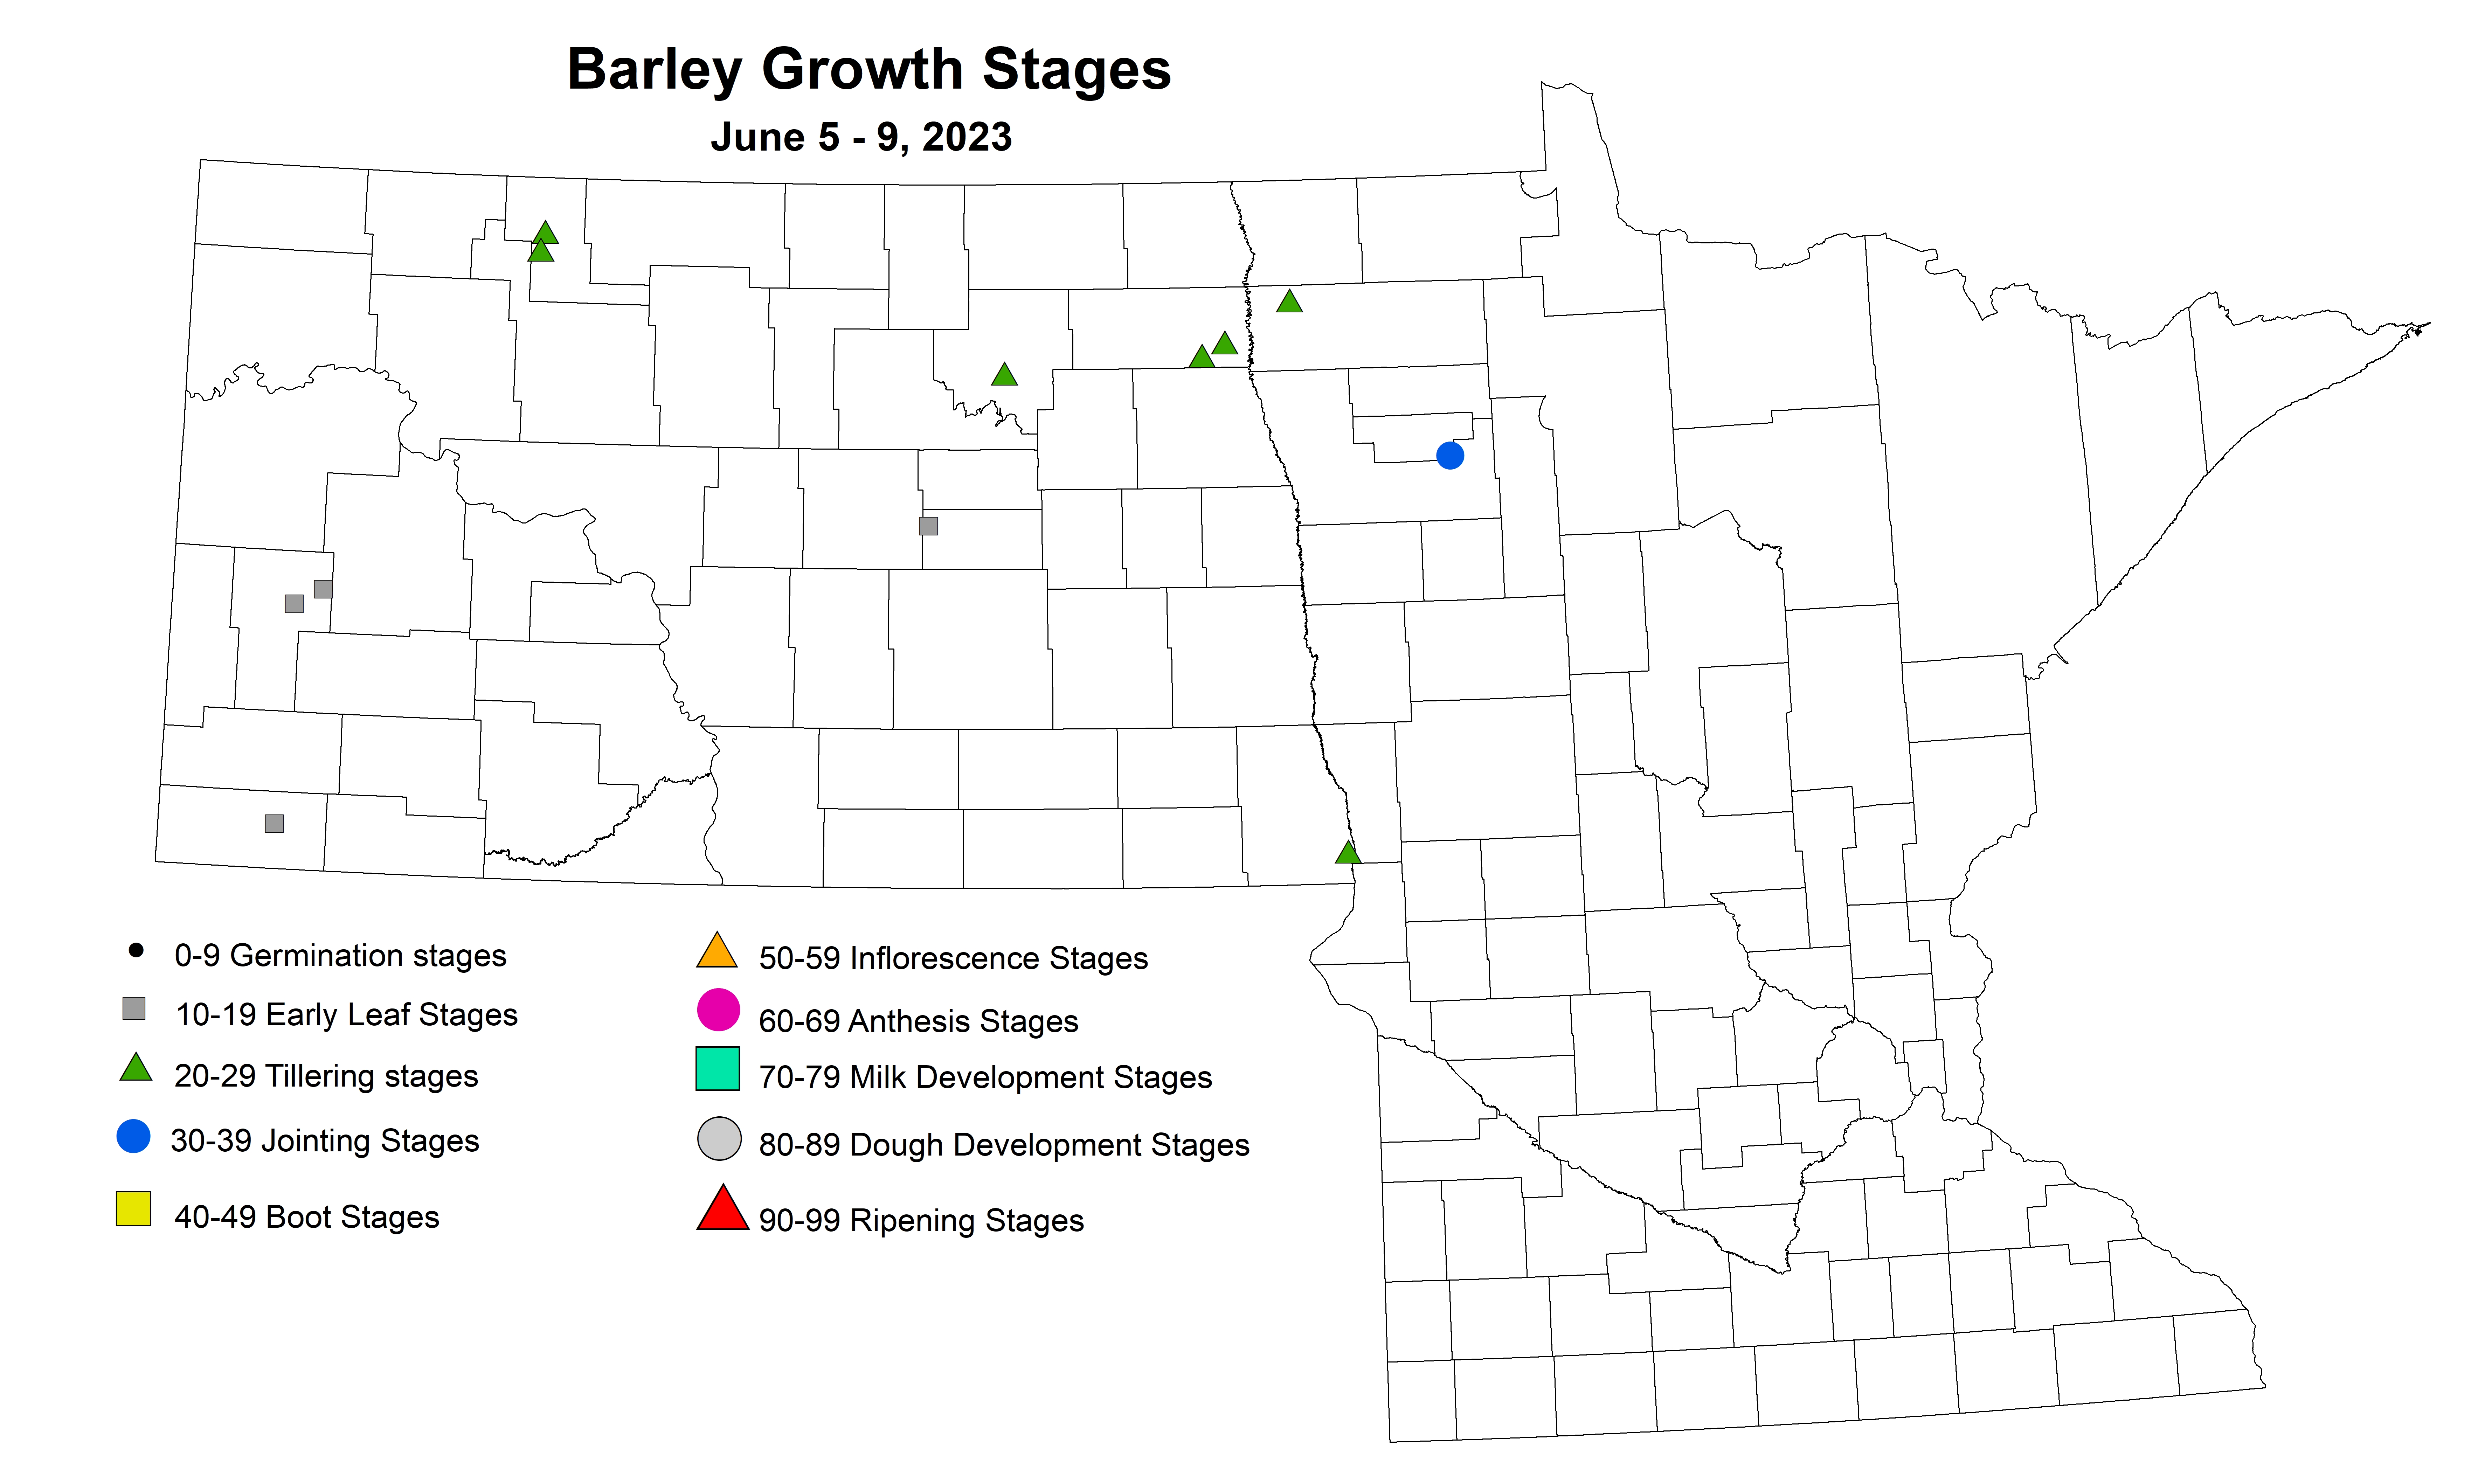 barley growth stages June 5-9 2023